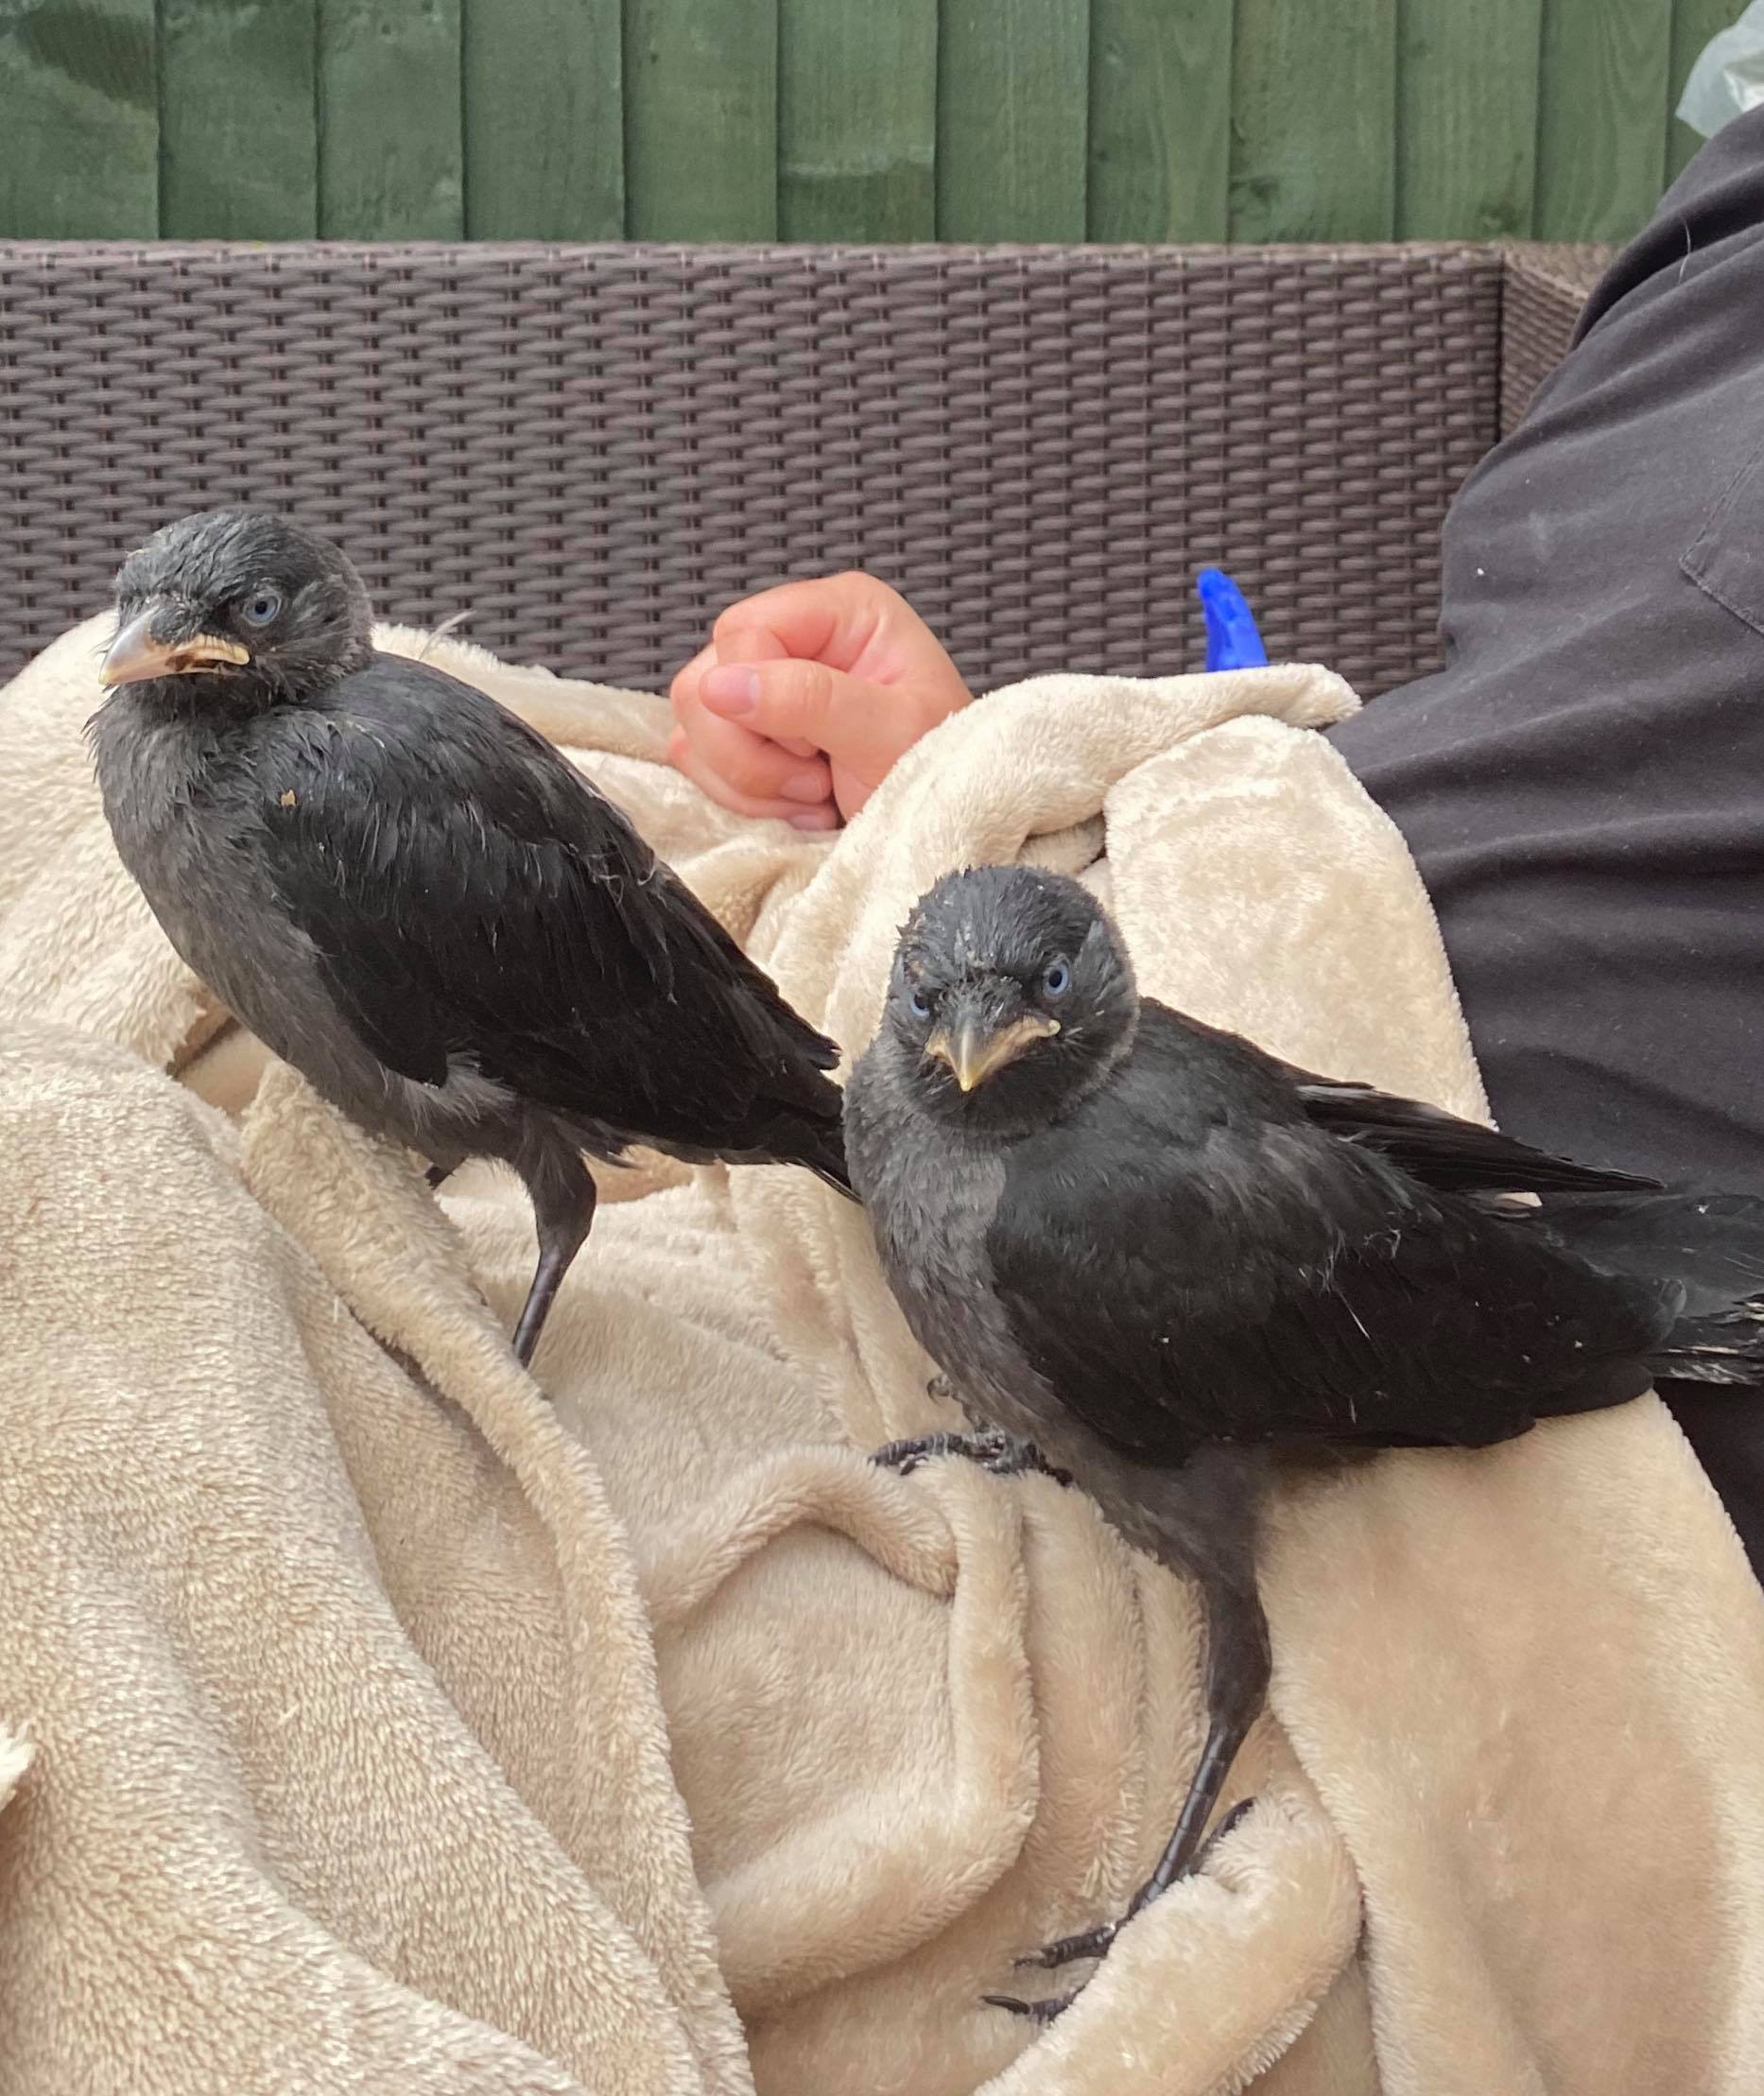 APPEAL | Residents asked to keep a look out for two missing jackdaw birds